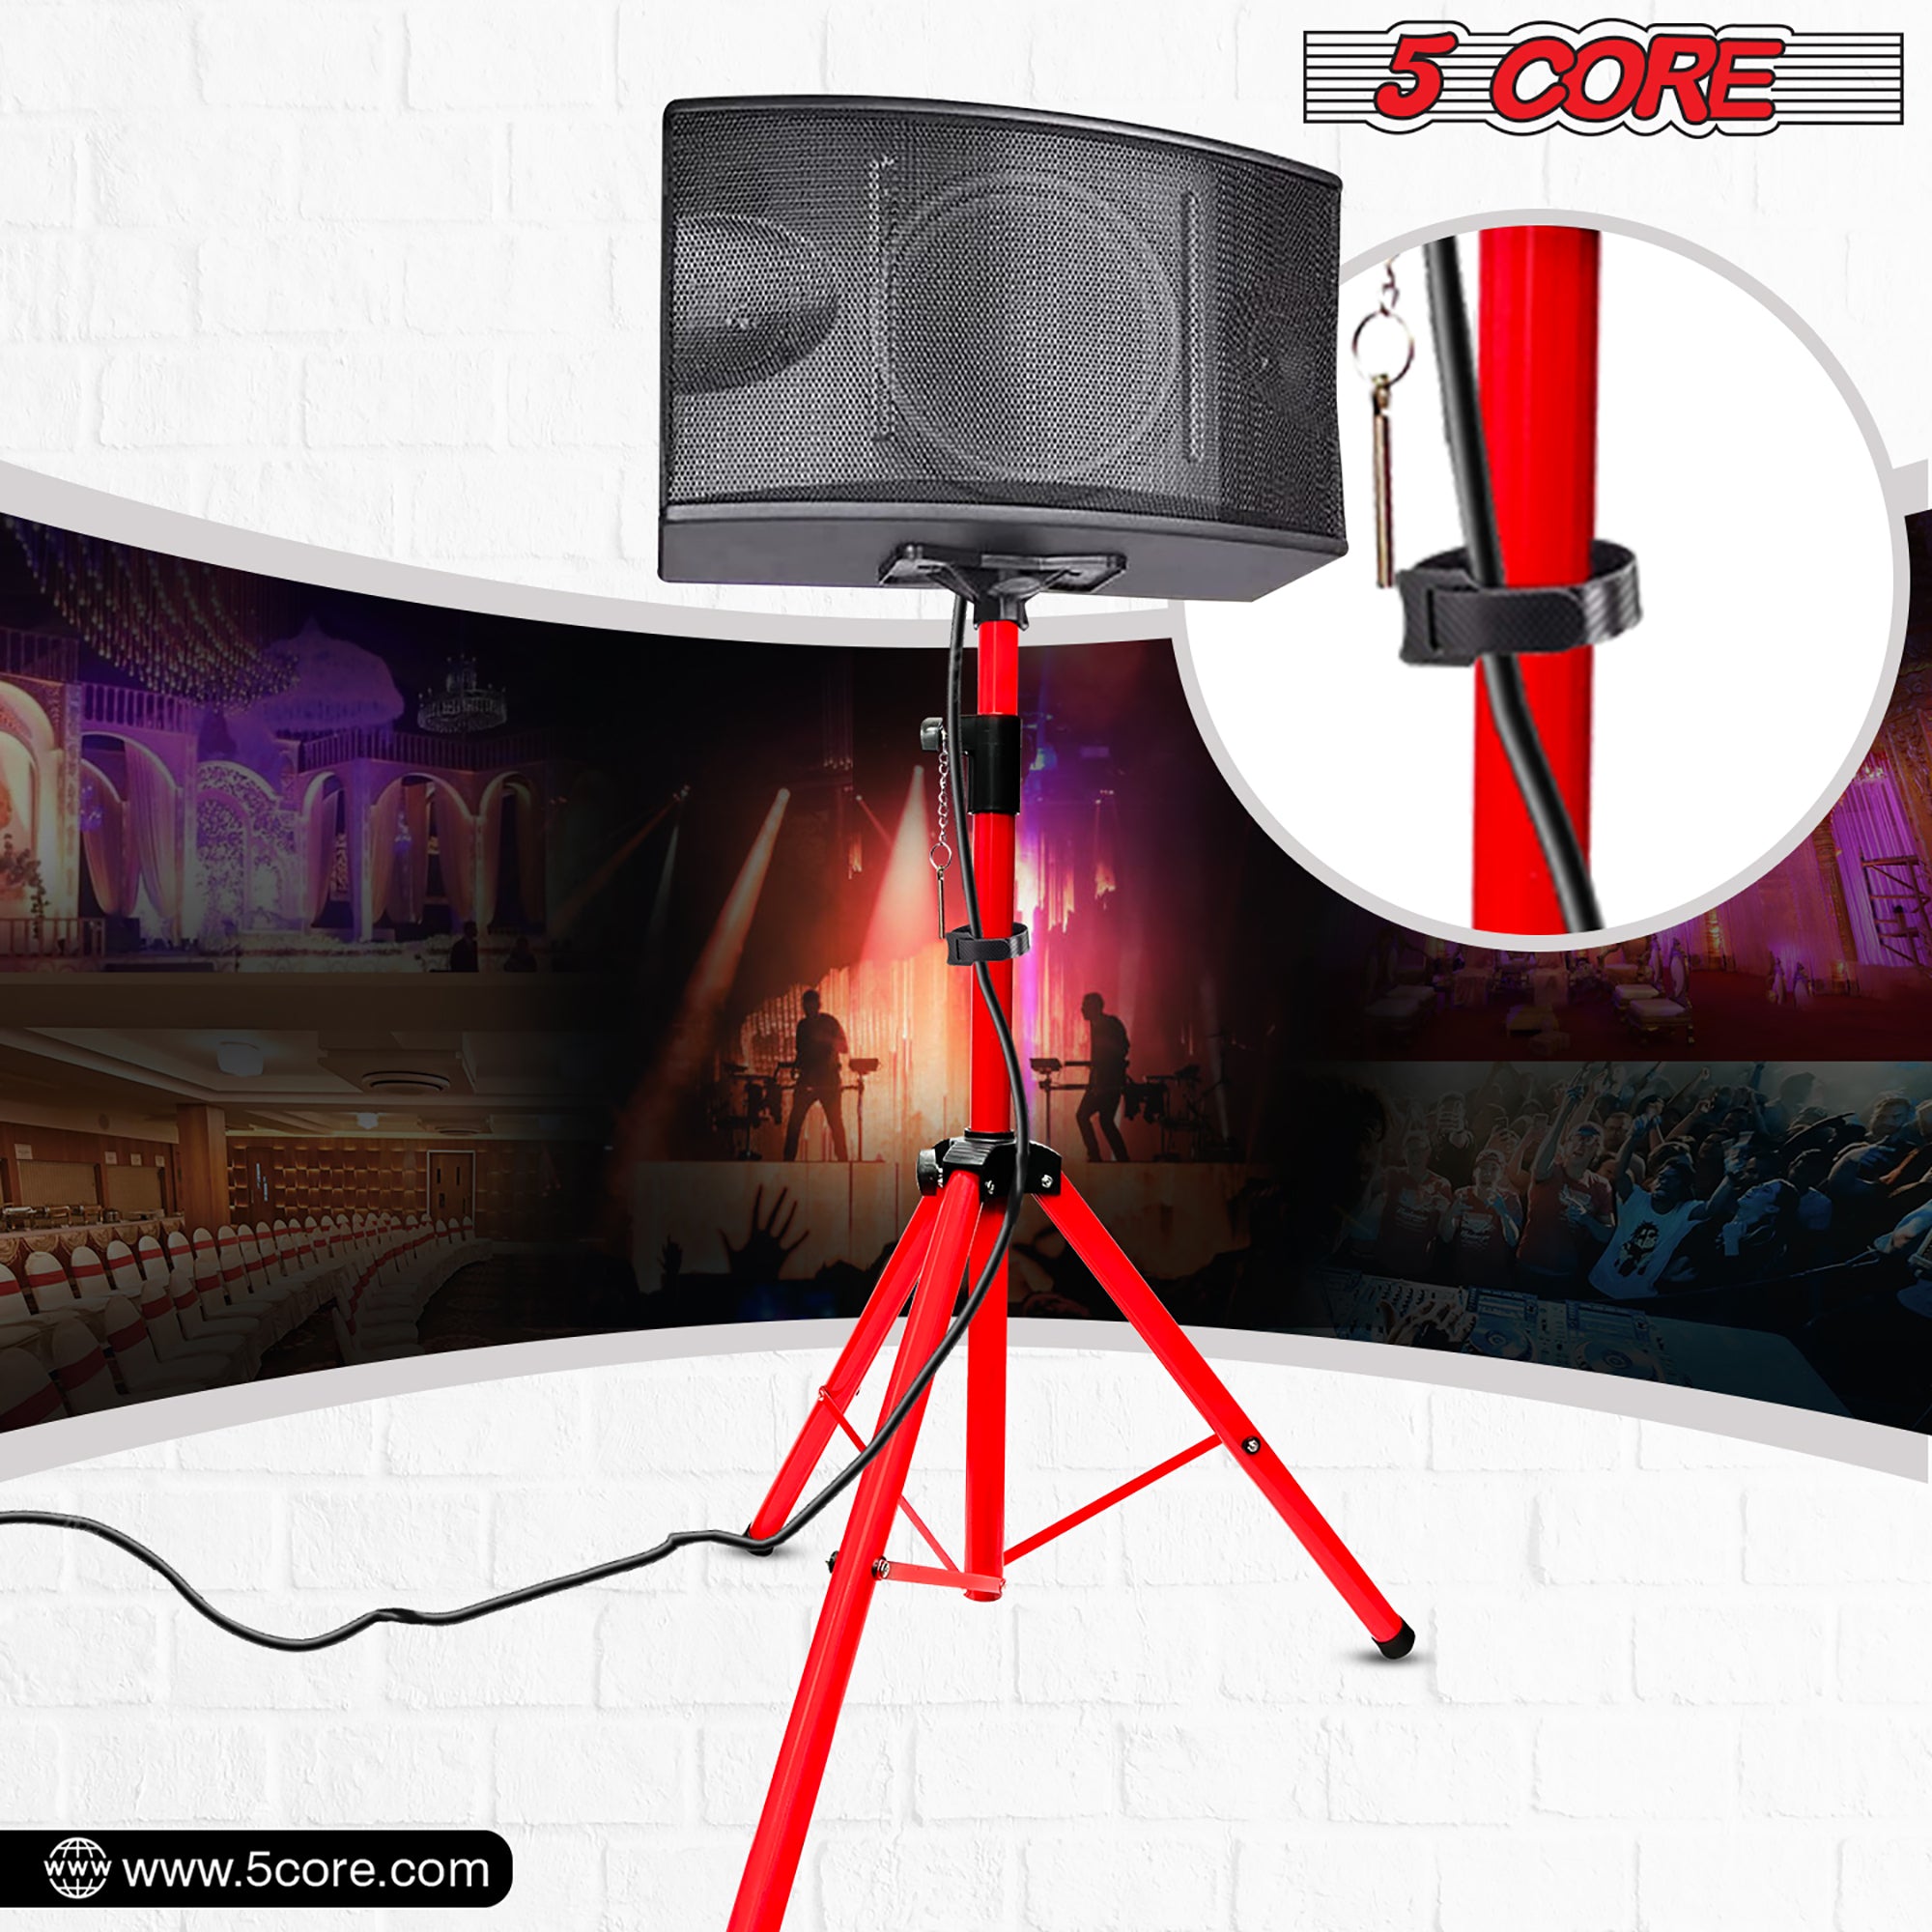 Compatible with various speakers, adjustable height, outdoor use, black color, 3.8 lbs.